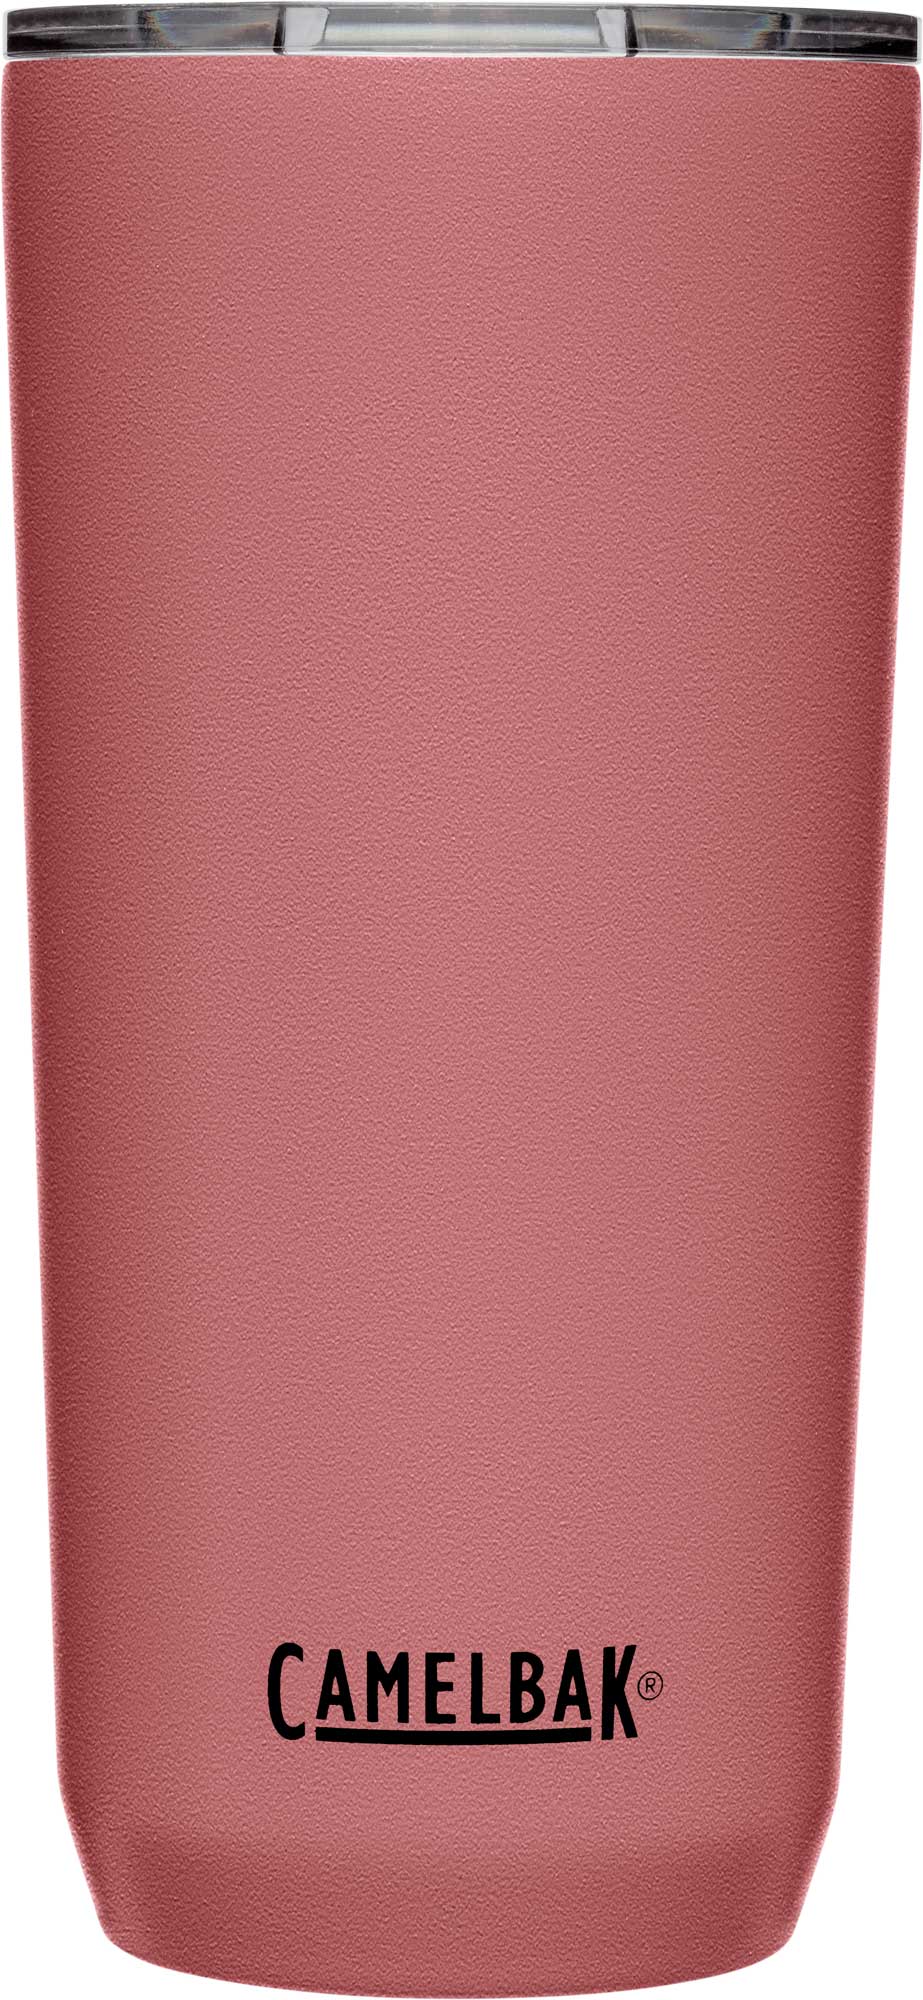 Camelbak Tumbler Insulated Stainless Steel 20oz - 600 ml - Isolierflasche